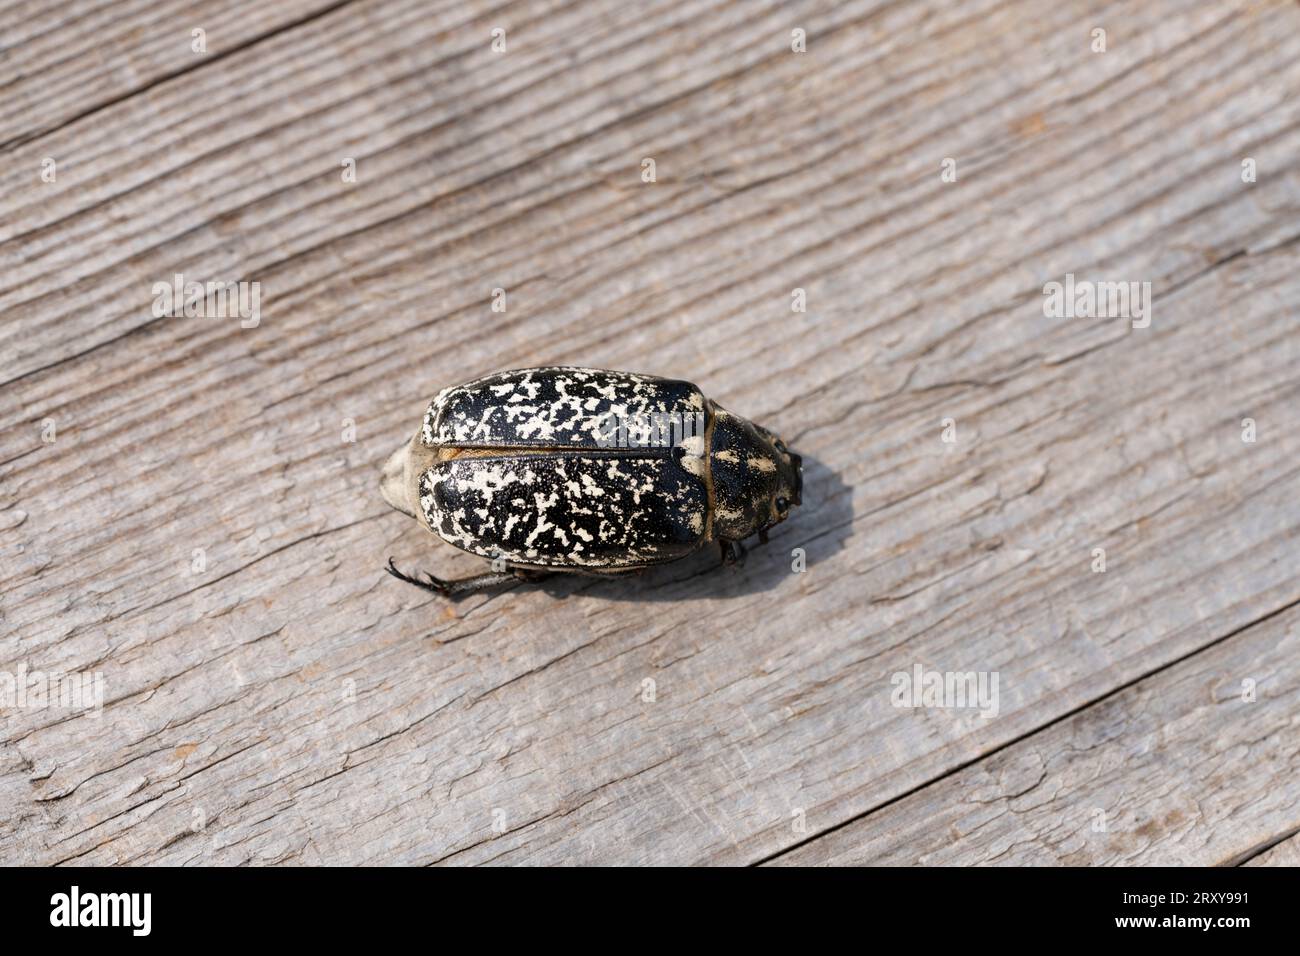 Polyphylla fullo Family Scarabaeidae Genus Polyphylla Pine Chafer wild nature insect photography, picture, wallpaper Stock Photo